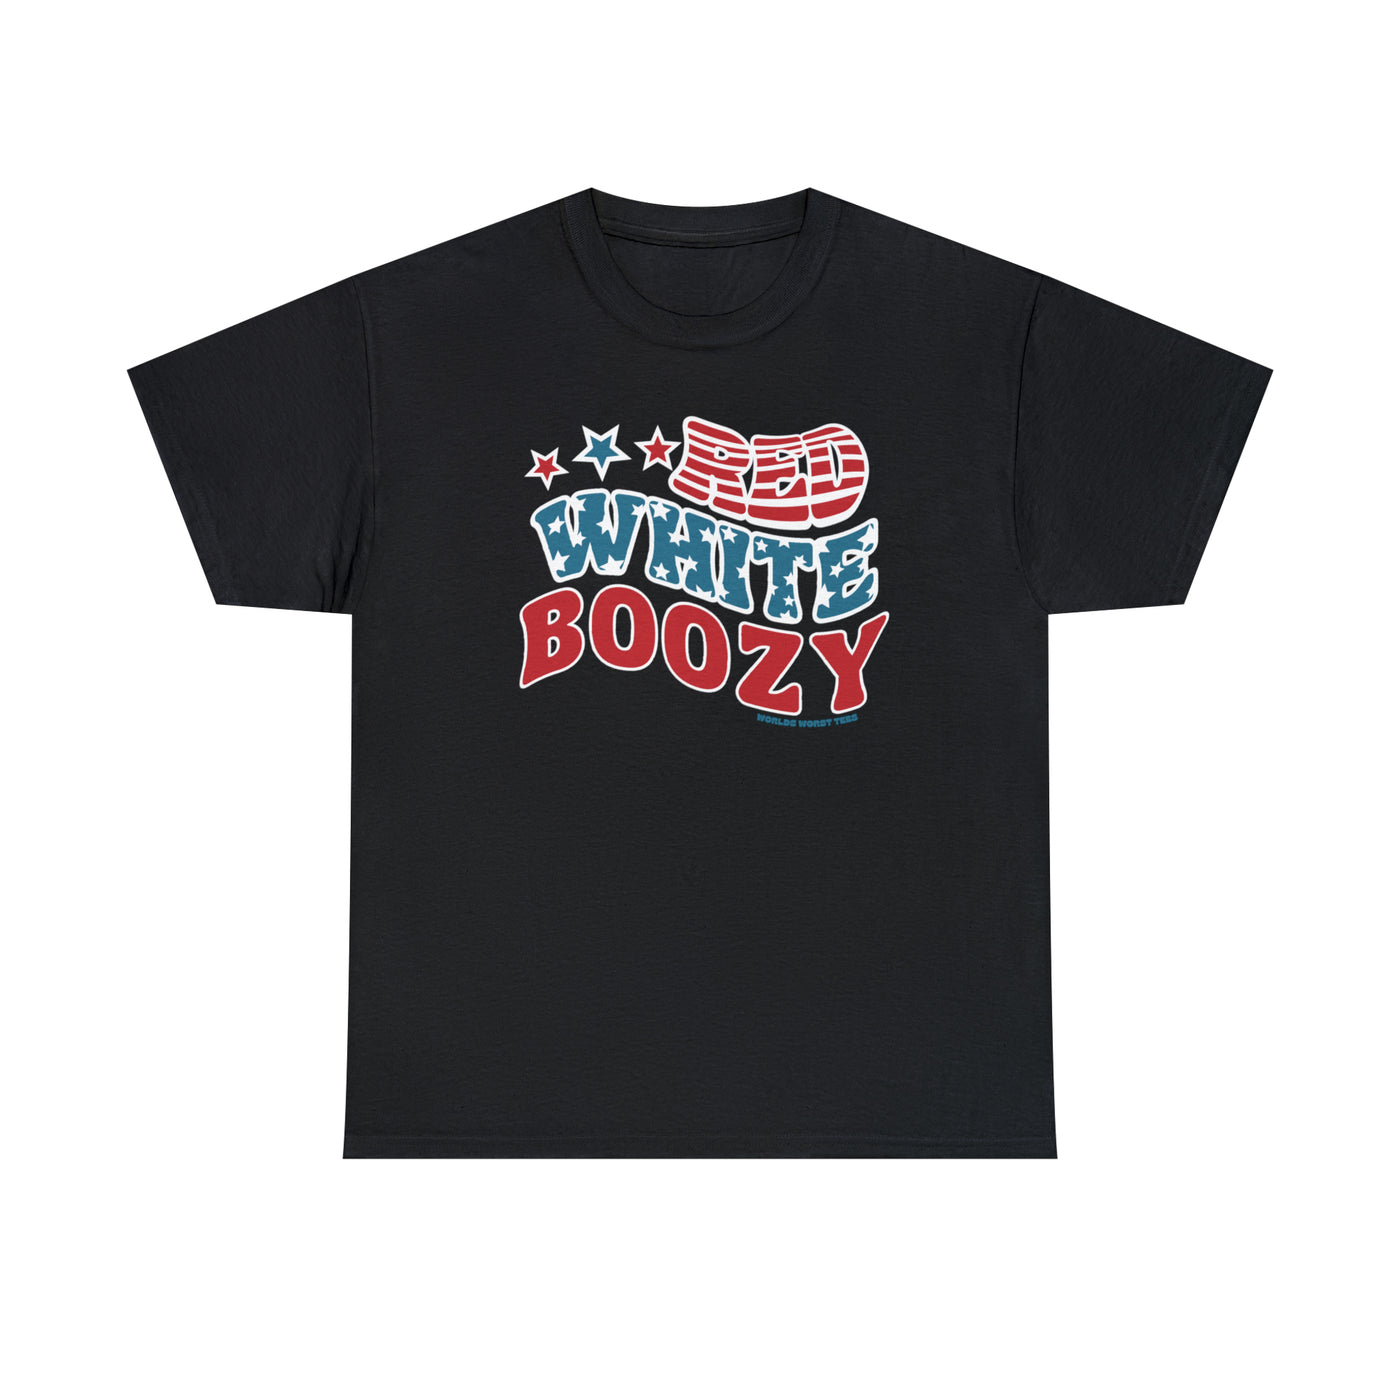 Red White and Boozy Tee